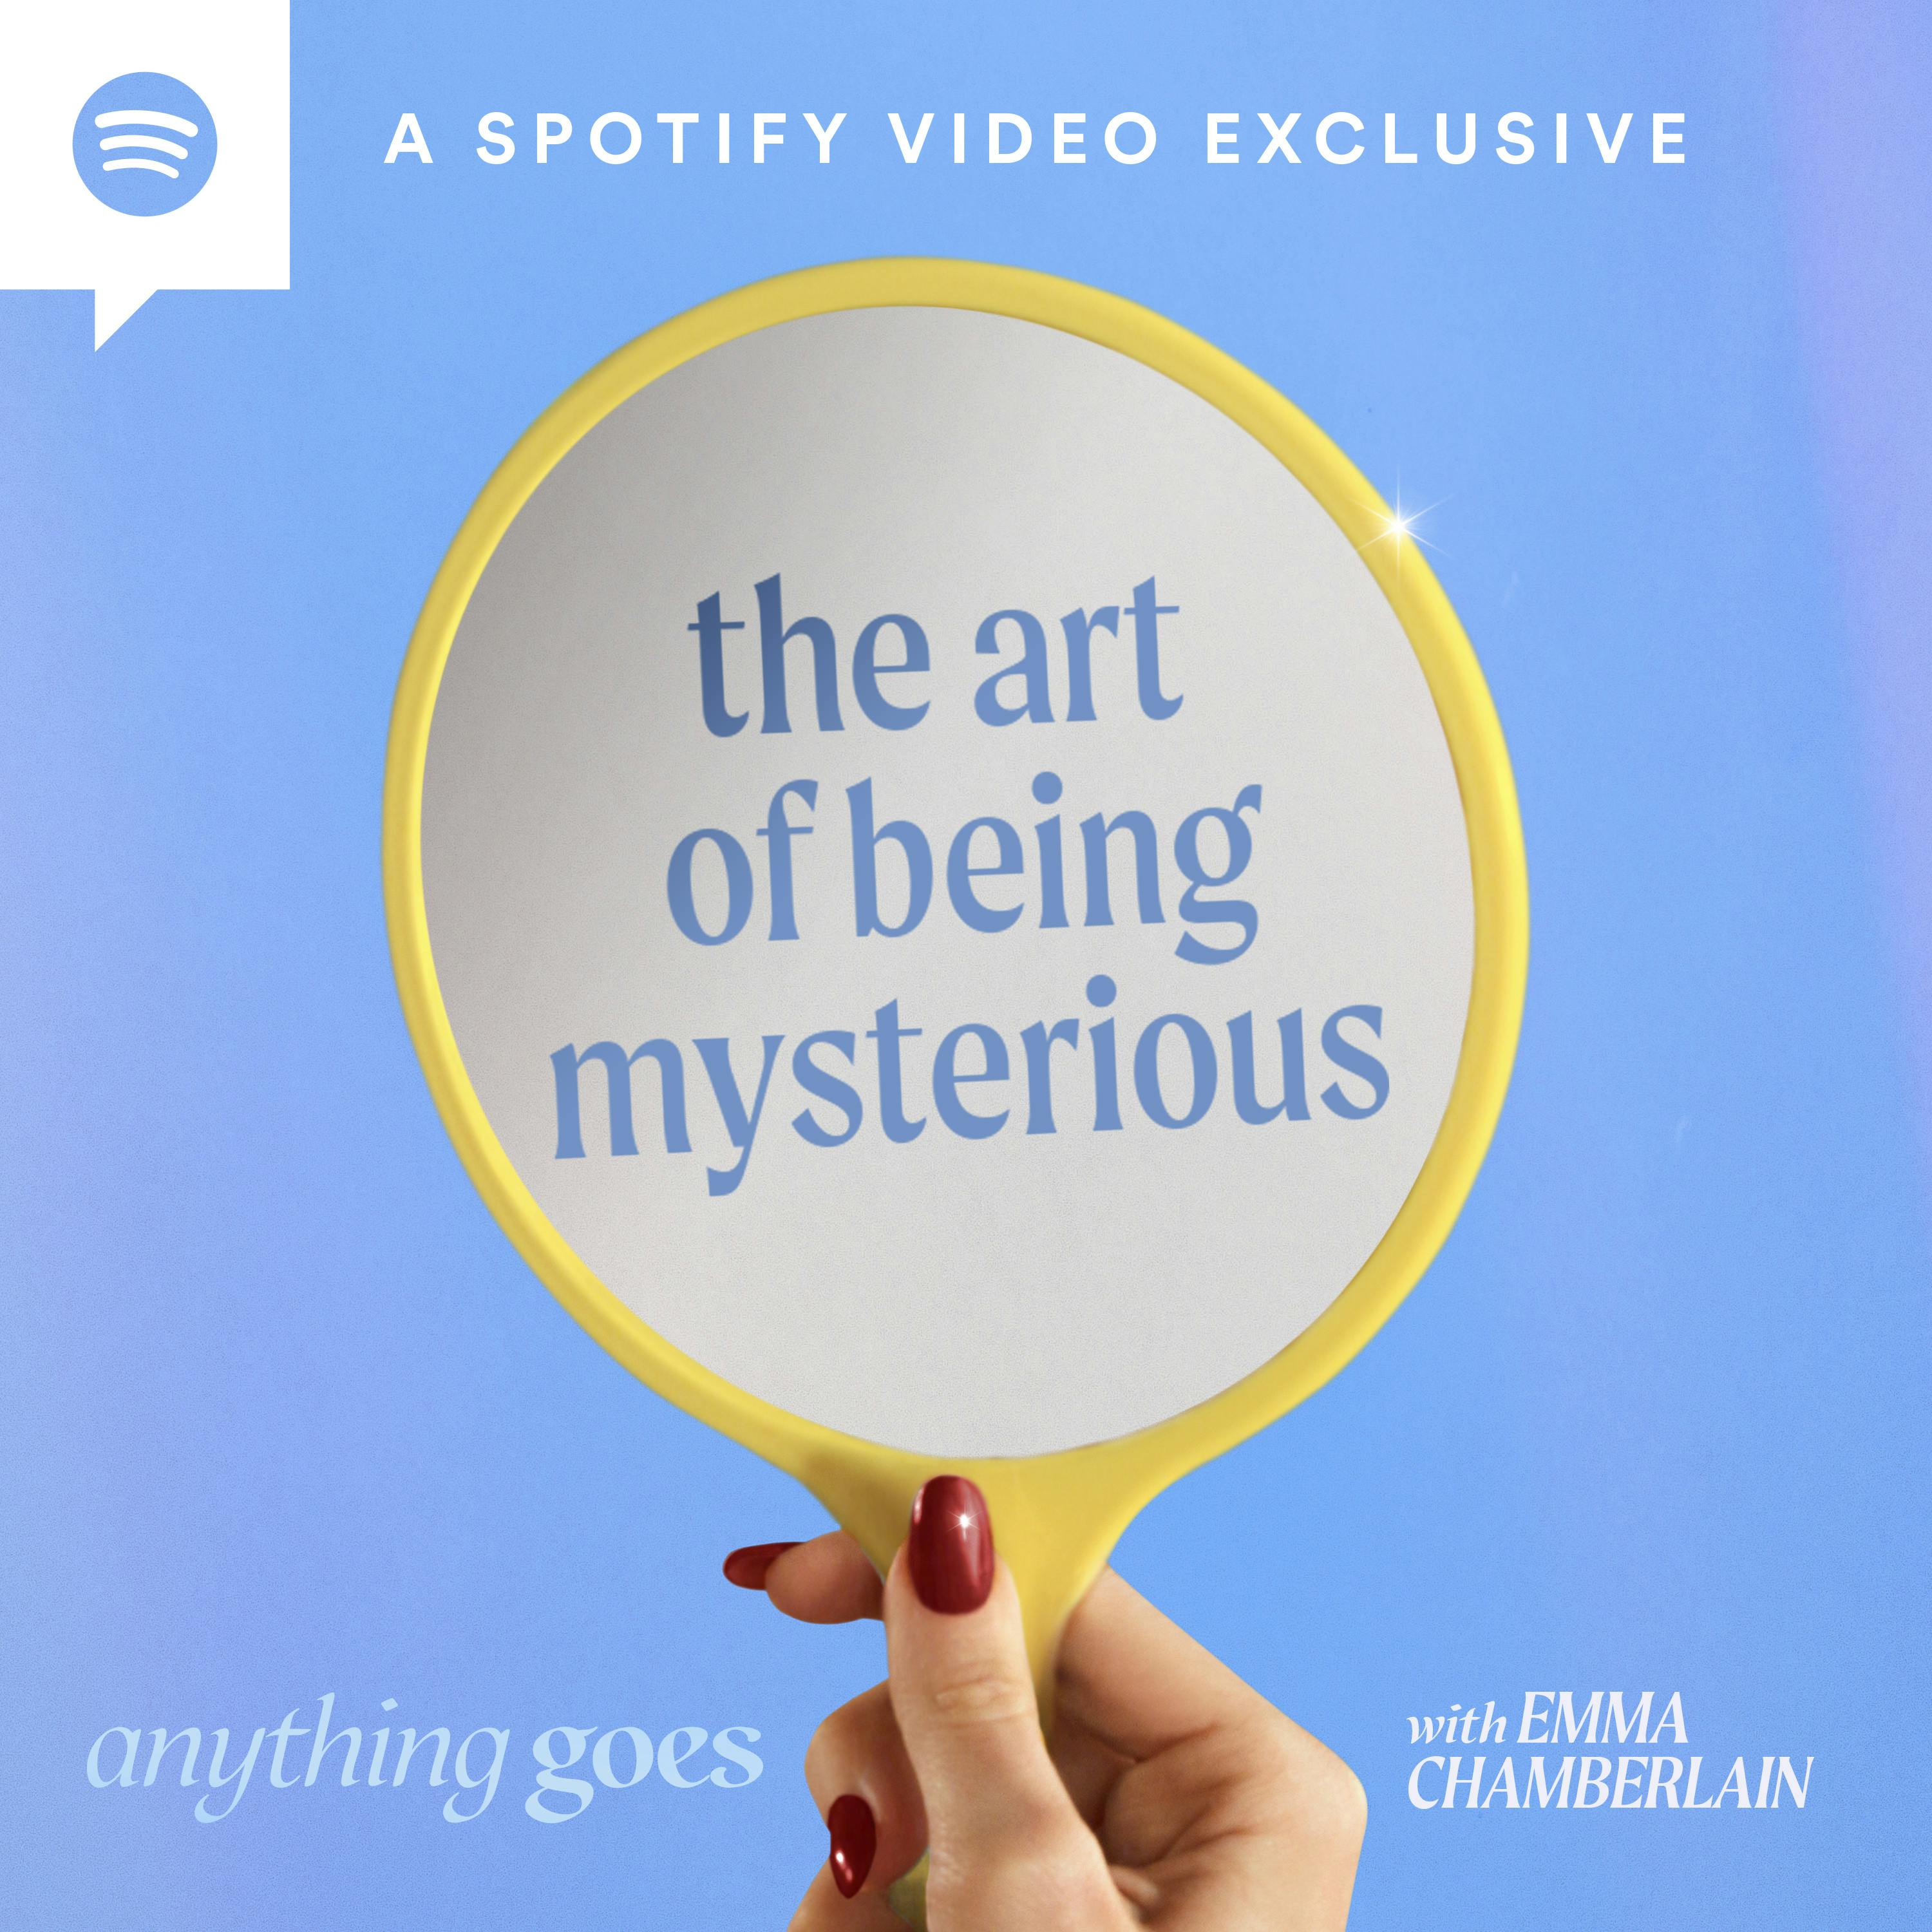 the art of being mysterious [video]